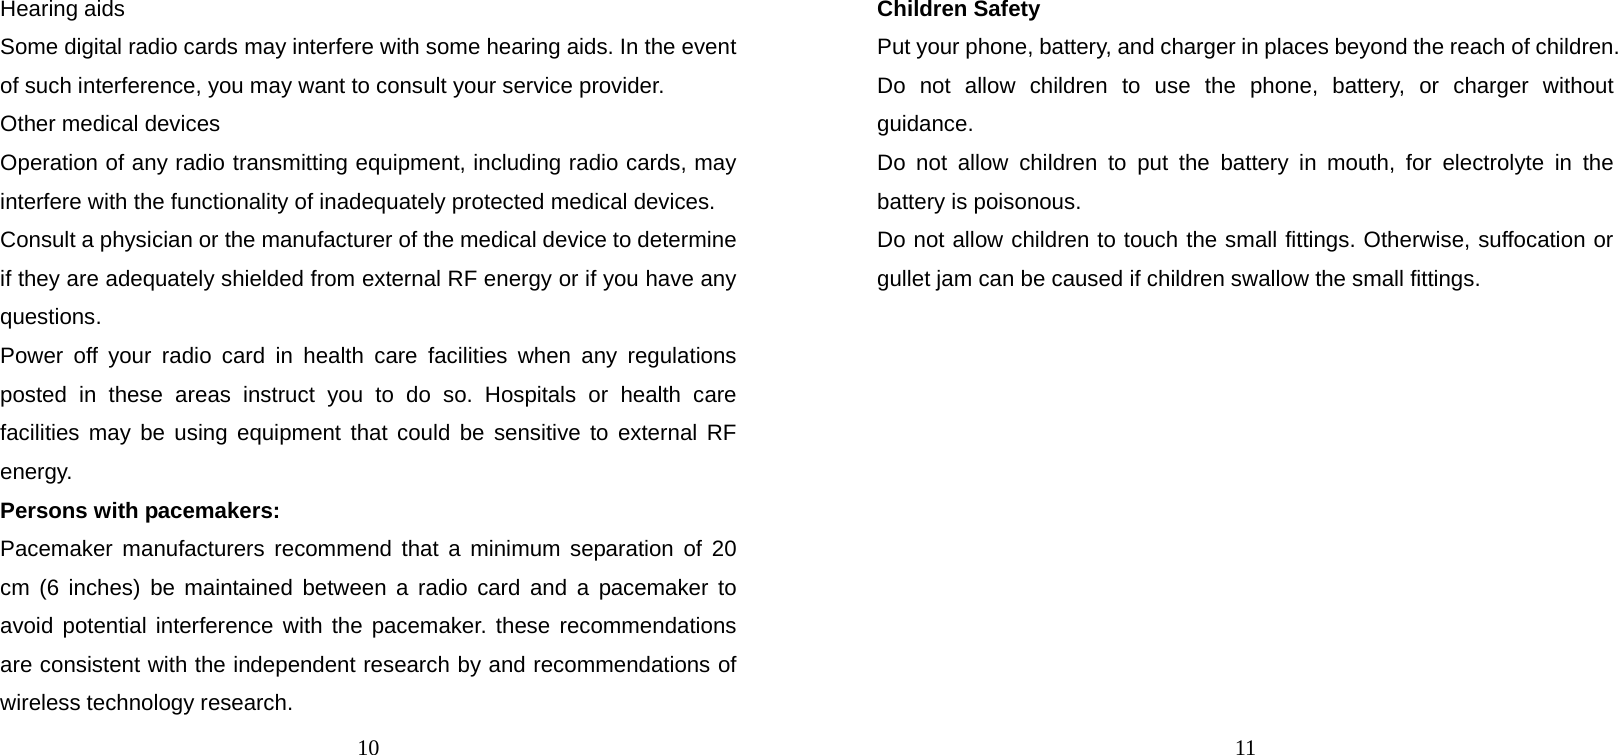 10 Hearing aids Some digital radio cards may interfere with some hearing aids. In the event of such interference, you may want to consult your service provider. Other medical devices Operation of any radio transmitting equipment, including radio cards, may interfere with the functionality of inadequately protected medical devices. Consult a physician or the manufacturer of the medical device to determine if they are adequately shielded from external RF energy or if you have any questions. Power off your radio card in health care facilities when any regulations posted in these areas instruct you to do so. Hospitals or health care facilities may be using equipment that could be sensitive to external RF energy. Persons with pacemakers: Pacemaker manufacturers recommend that a minimum separation of 20 cm (6 inches) be maintained between a radio card and a pacemaker to avoid potential interference with the pacemaker. these recommendations are consistent with the independent research by and recommendations of wireless technology research. 11 Children Safety Put your phone, battery, and charger in places beyond the reach of children. Do not allow children to use the phone, battery, or charger without guidance. Do not allow children to put the battery in mouth, for electrolyte in the battery is poisonous.   Do not allow children to touch the small fittings. Otherwise, suffocation or gullet jam can be caused if children swallow the small fittings.   